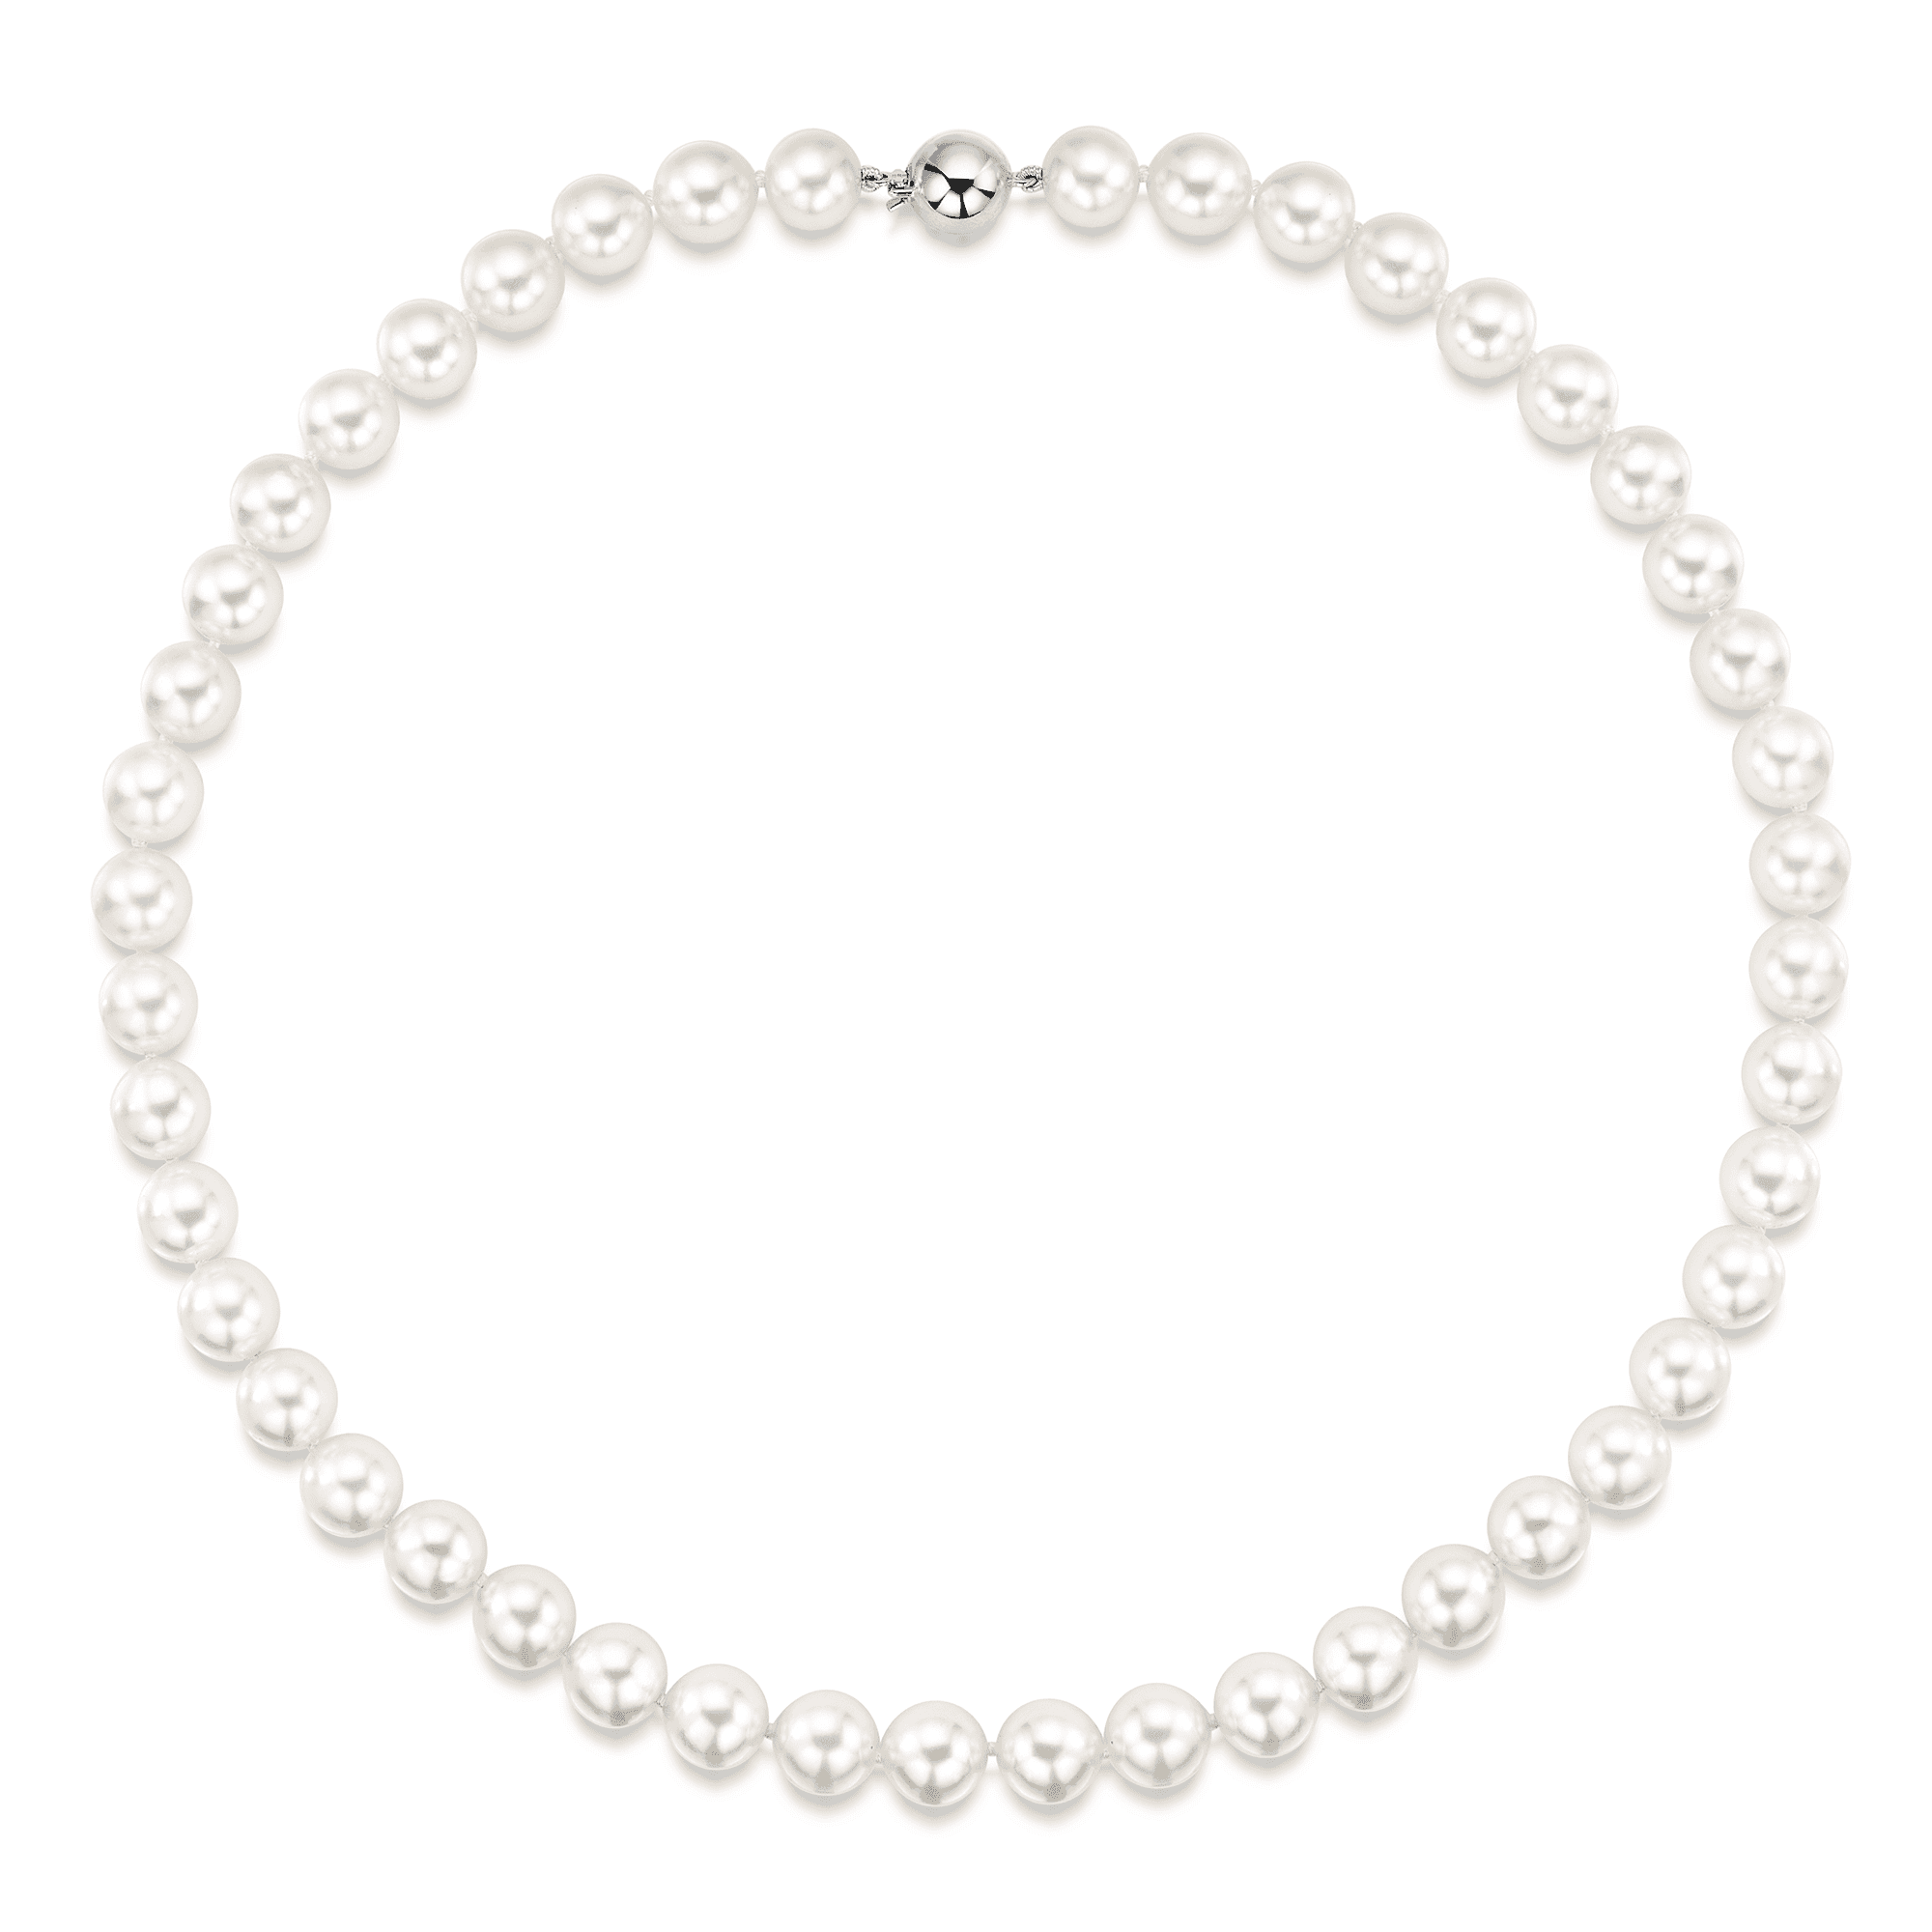 Akoya 8.5-9mm Pearl Necklet with 18ct White Gold Ball Clasp